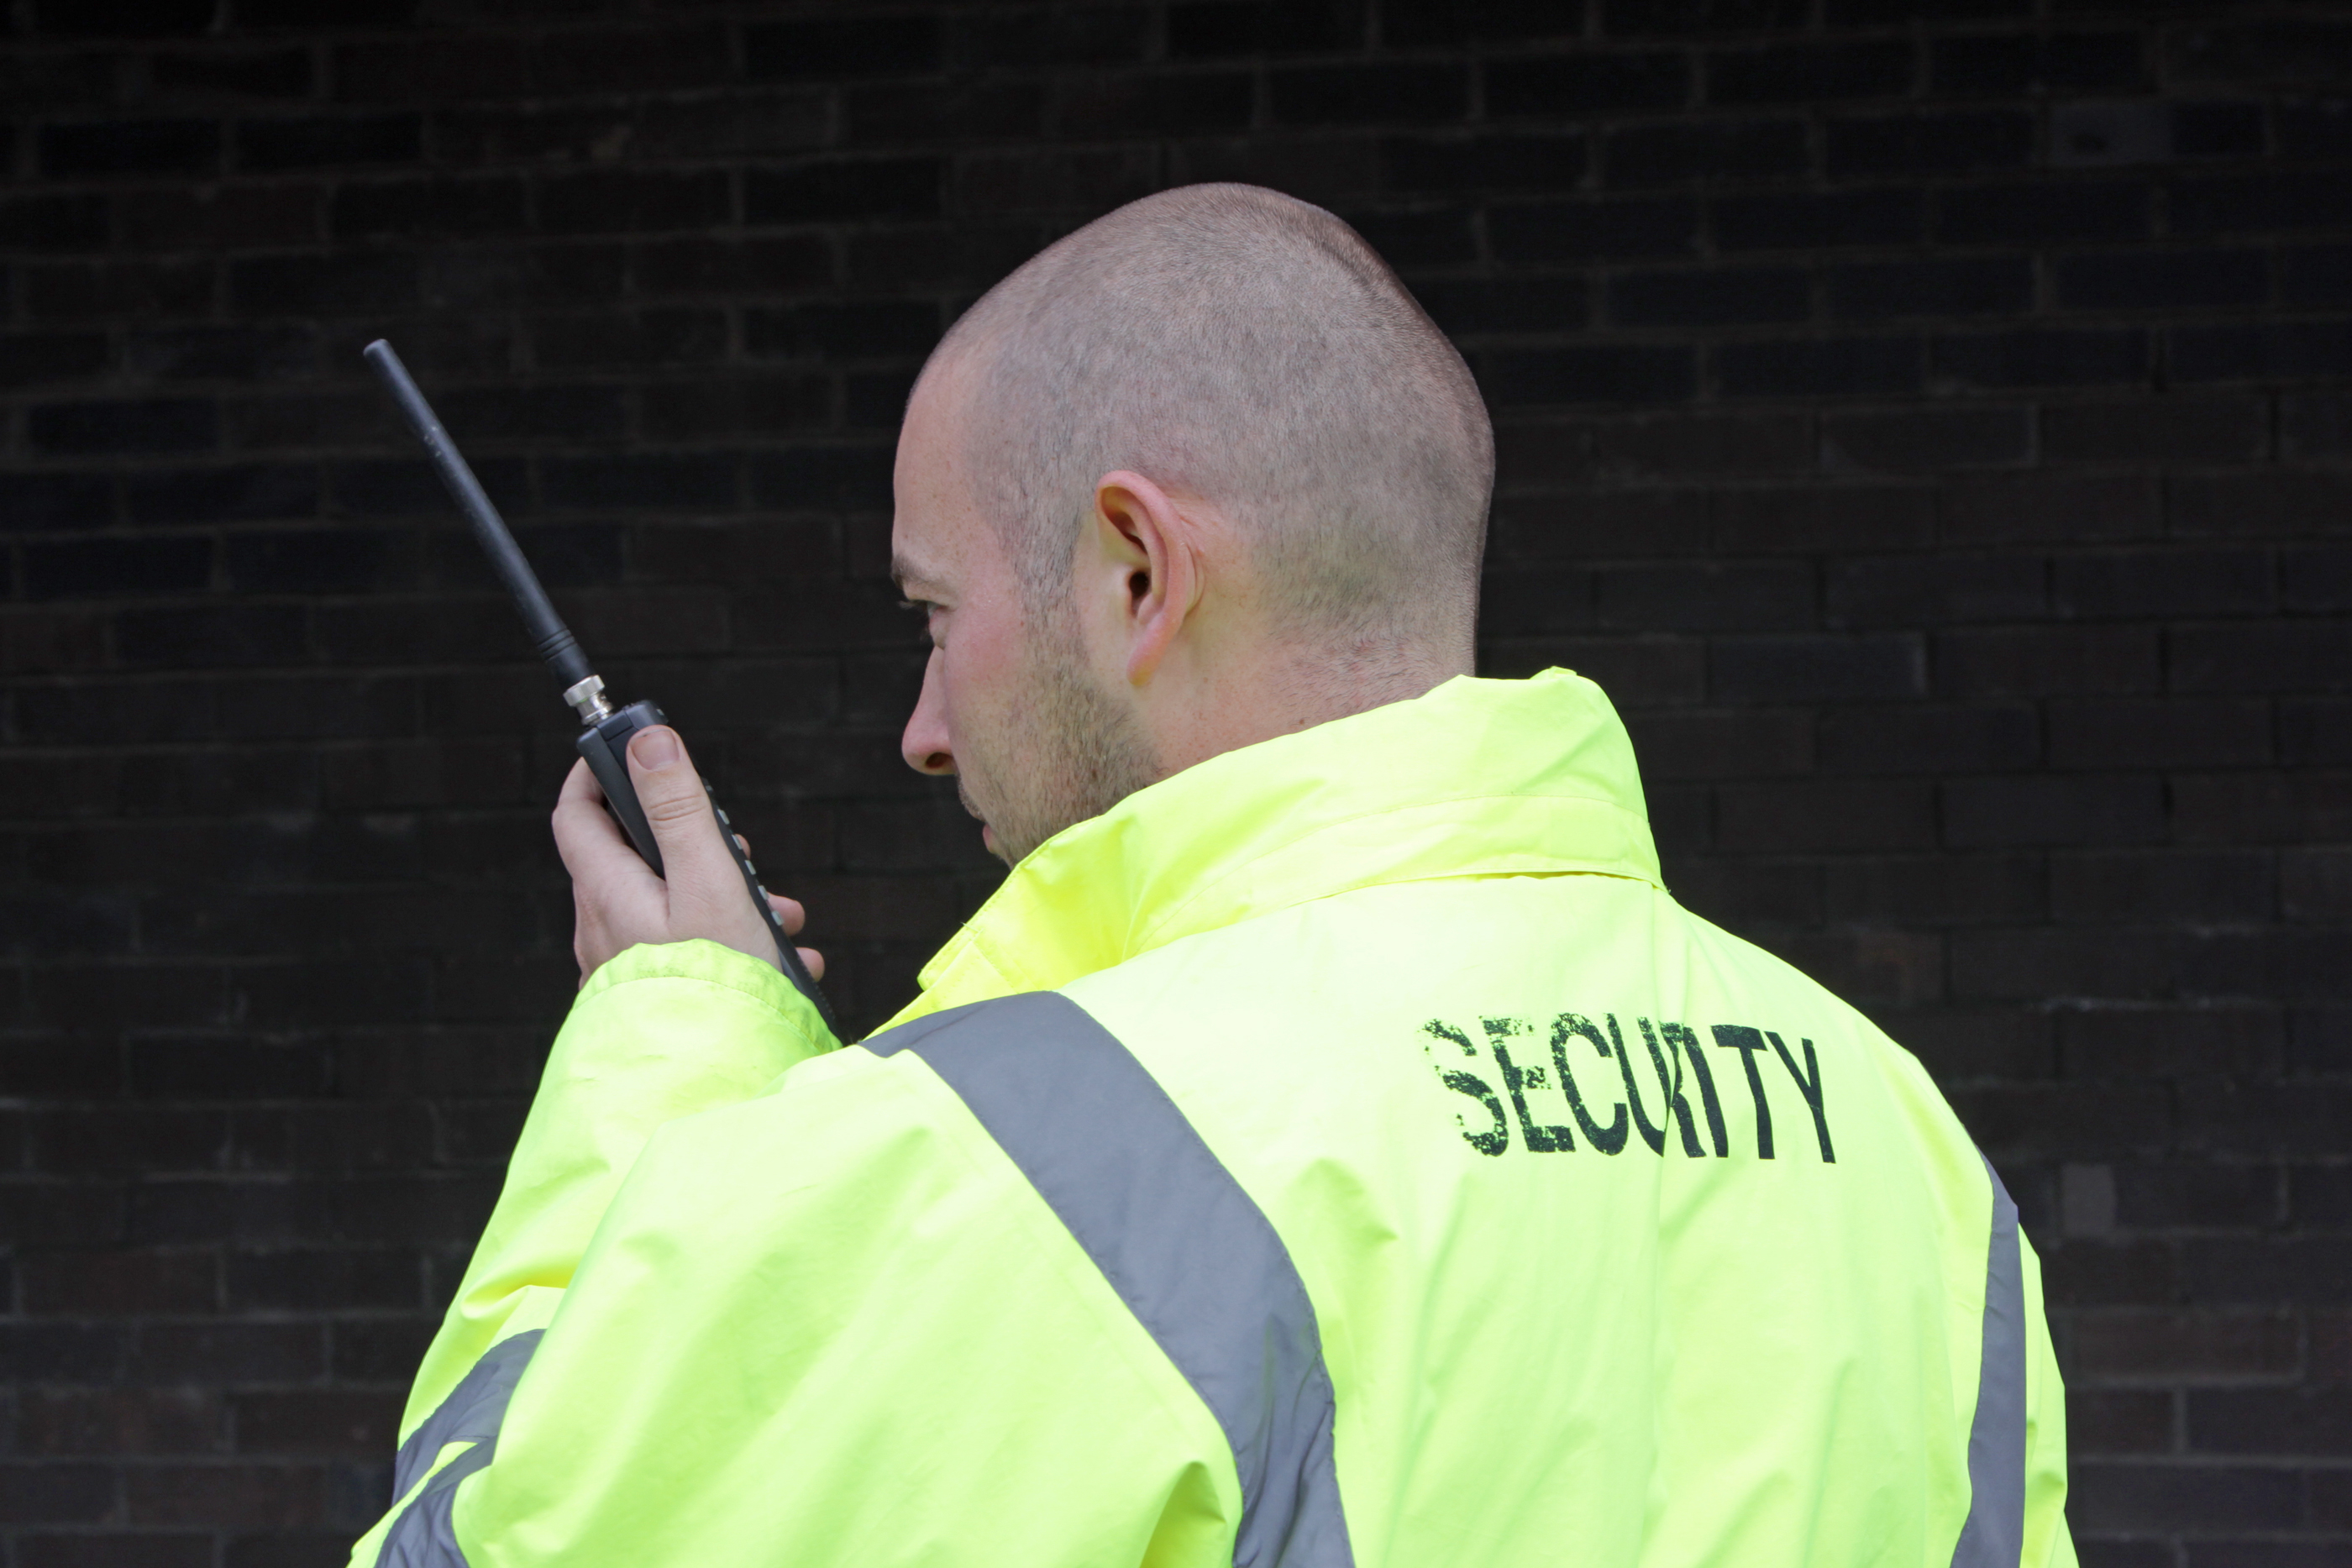 security officer using a walkie talkie to show the requirements for becoming a security officer